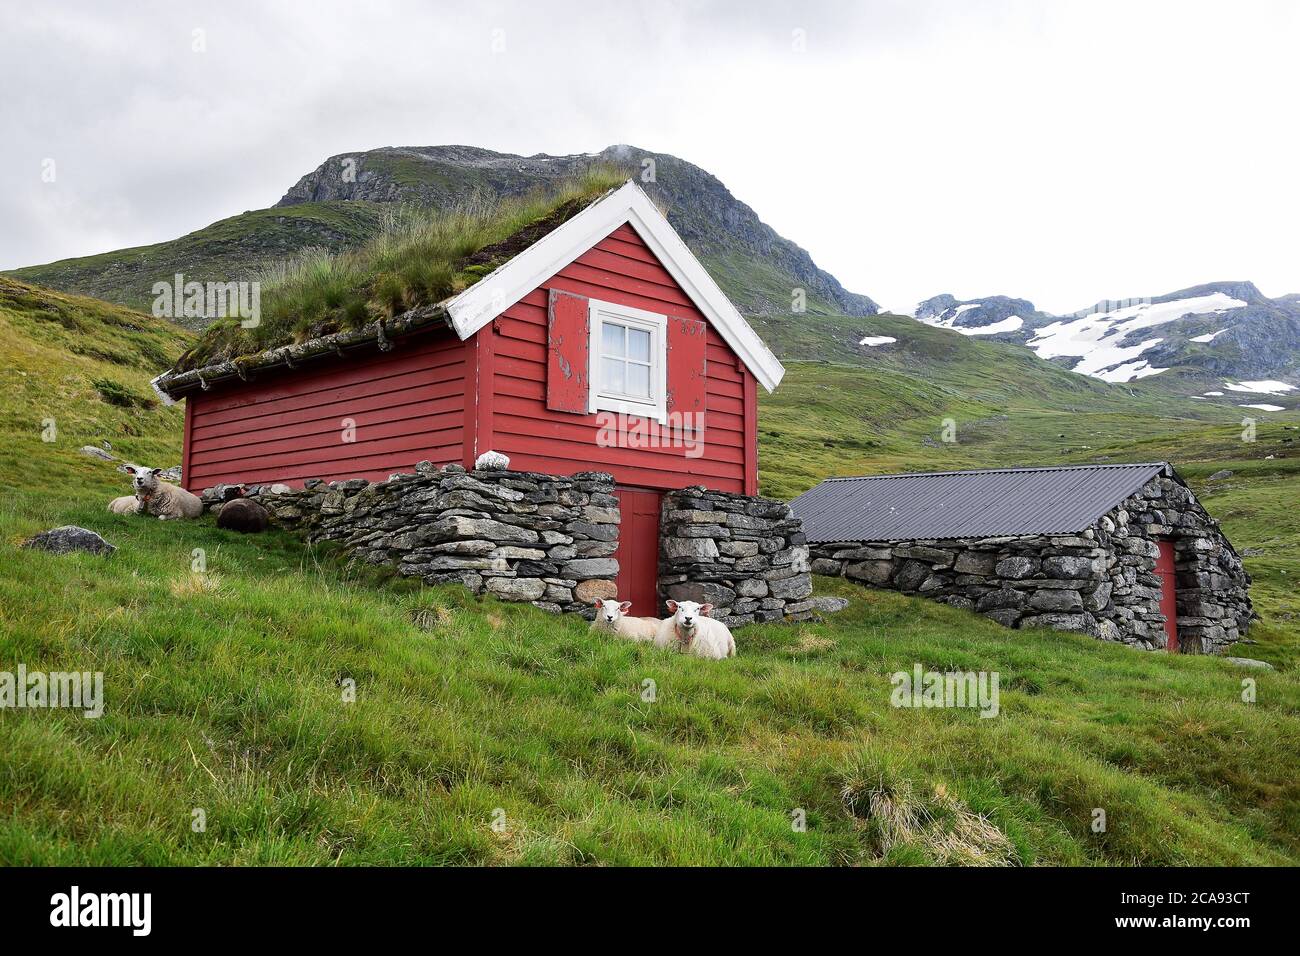 NORWEGIAN LANDSCAPES WITH WOODS, MOUNTAINS AND FJORDS Stock Photo